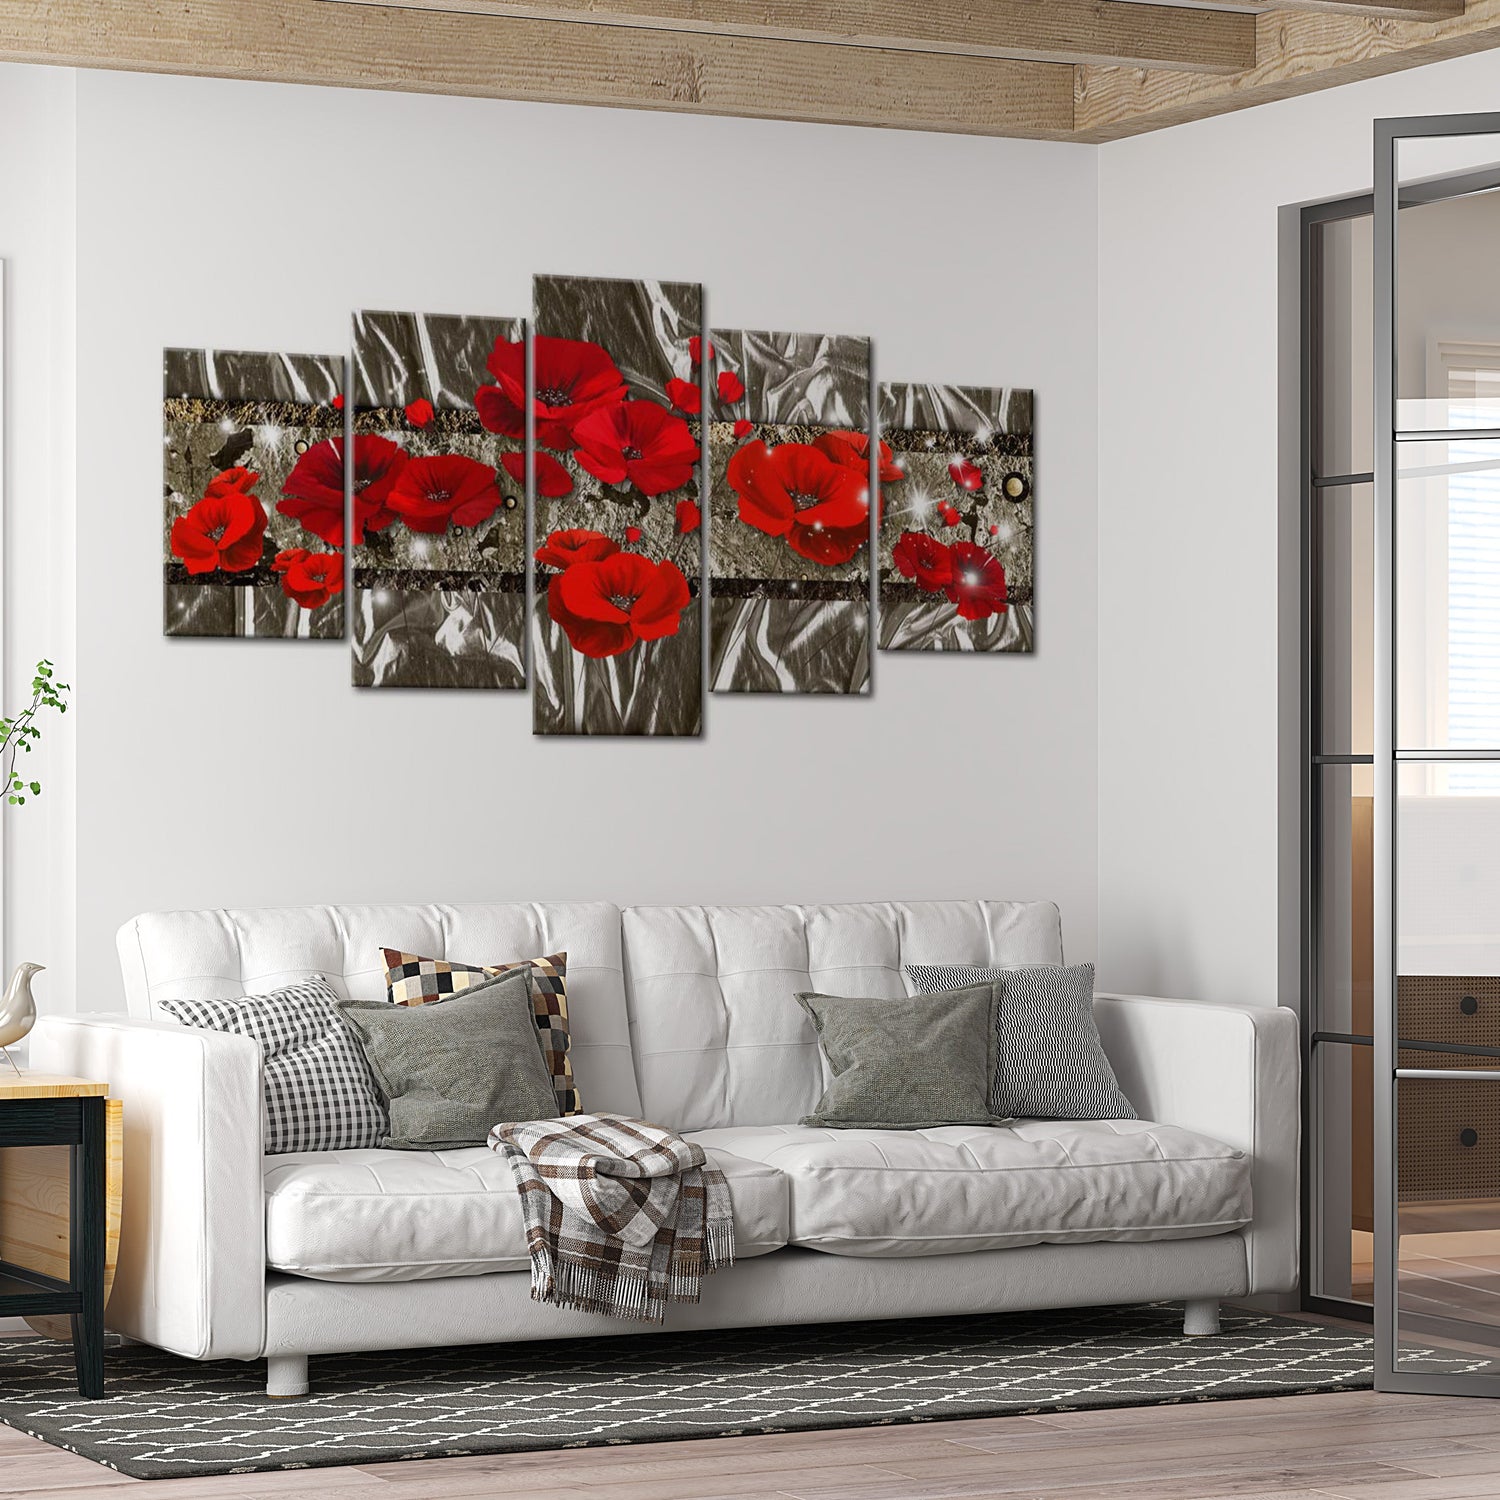 Glamour Canvas Wall Art - Silver Poppies - 5 Pieces